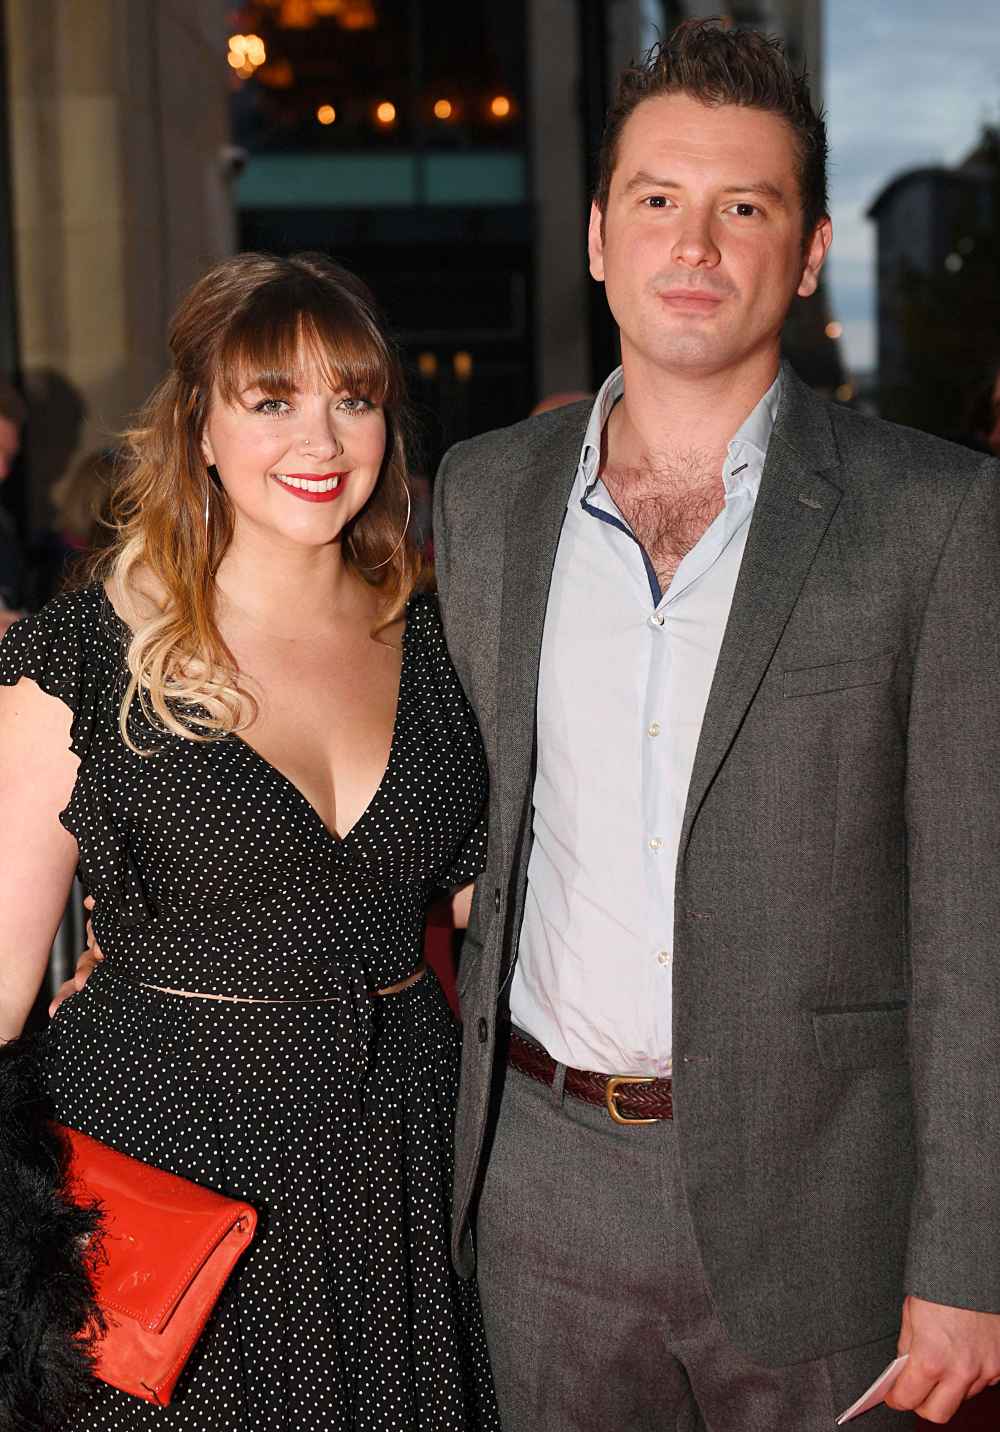 Charlotte Church Welcomes 3rd Child Following Miscarriage